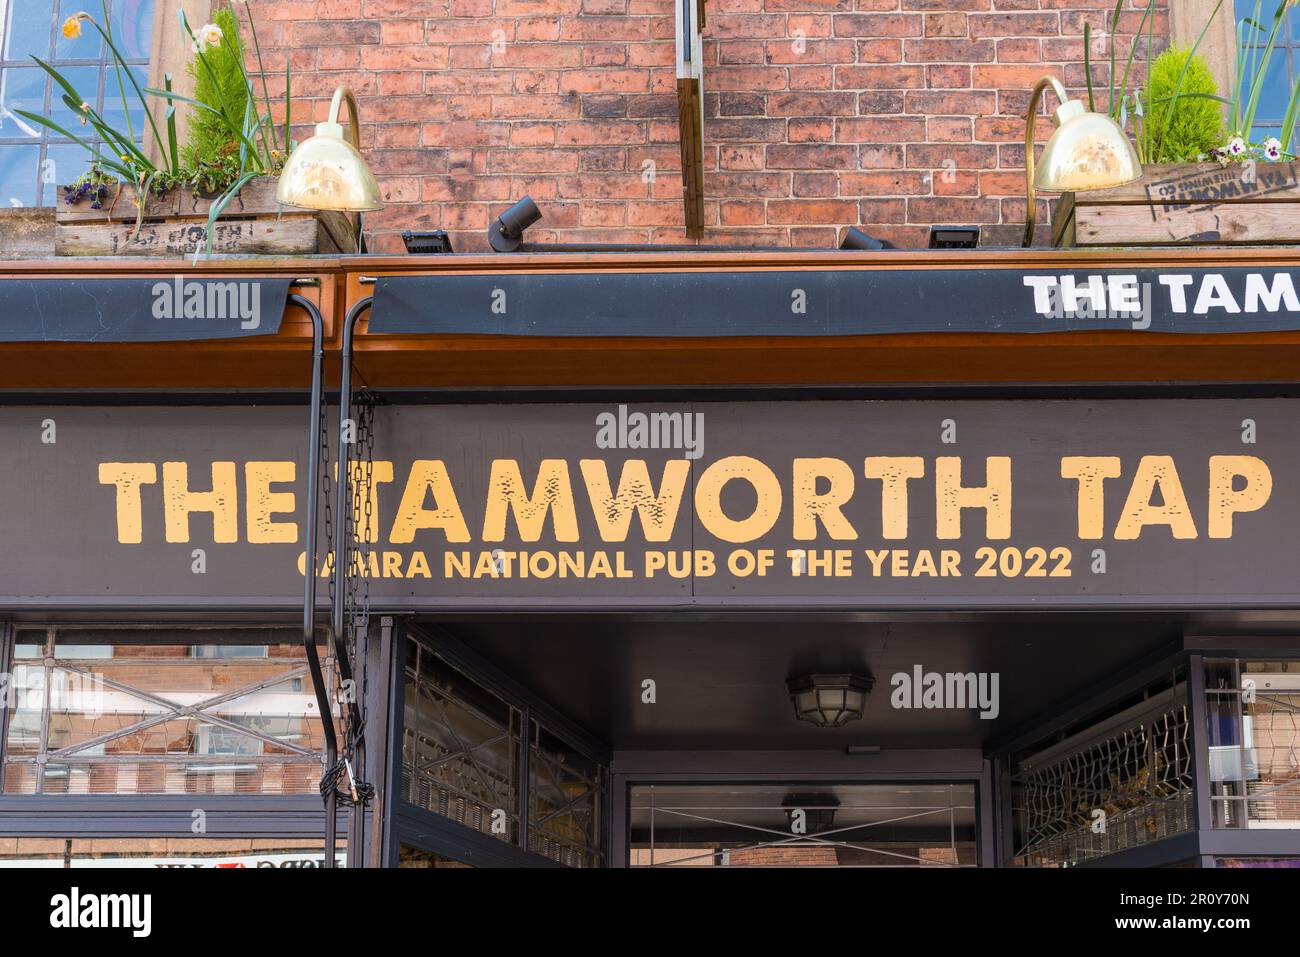 The Tamworth Tap CAMRA national pub of the year in Tamworth, Staffordshire Stock Photo